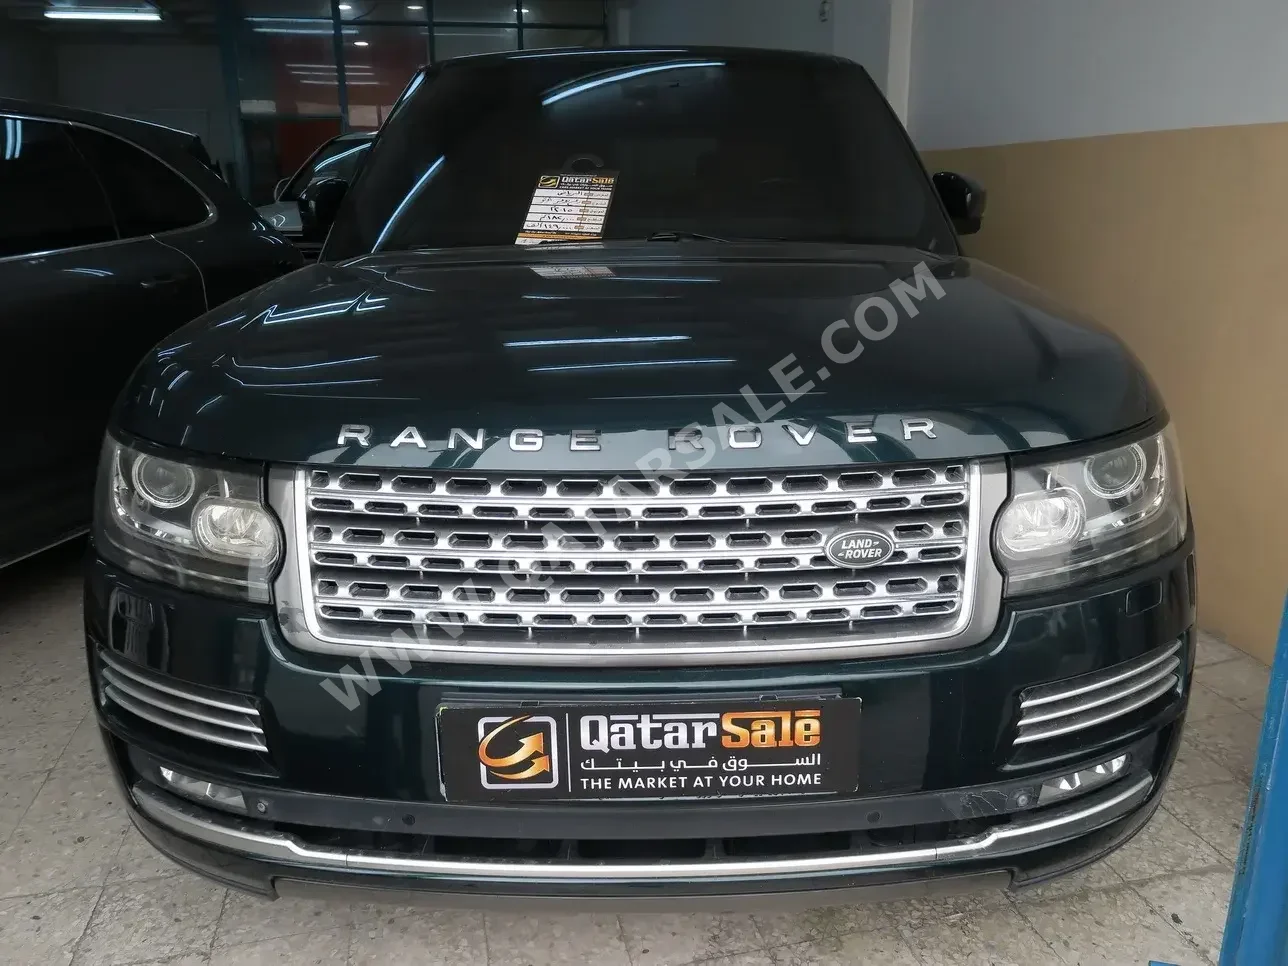 Land Rover  Range Rover  Vogue  Autobiography  2015  Automatic  182,000 Km  8 Cylinder  Four Wheel Drive (4WD)  SUV  Black